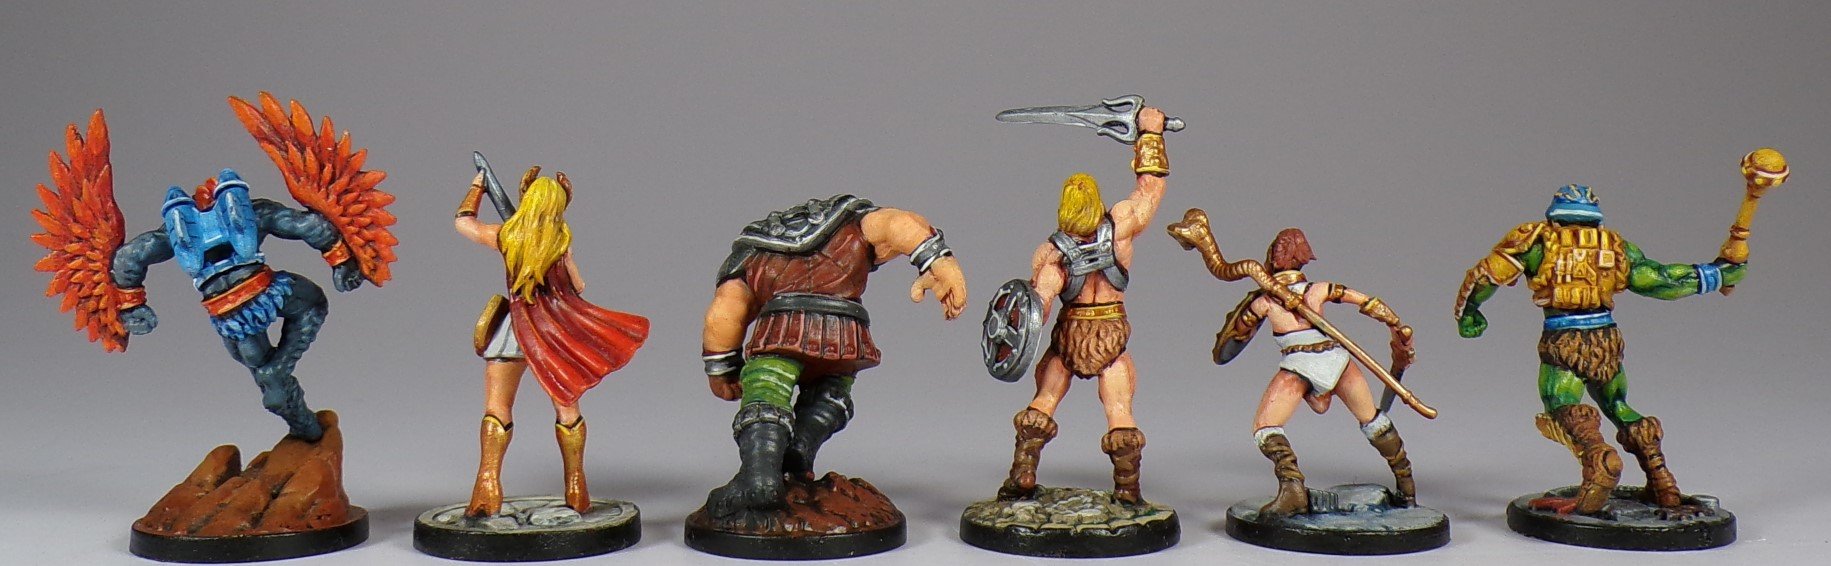 Paintedfigs Masters of the Universe Clash for Eternia miniature painting service (40).jpg